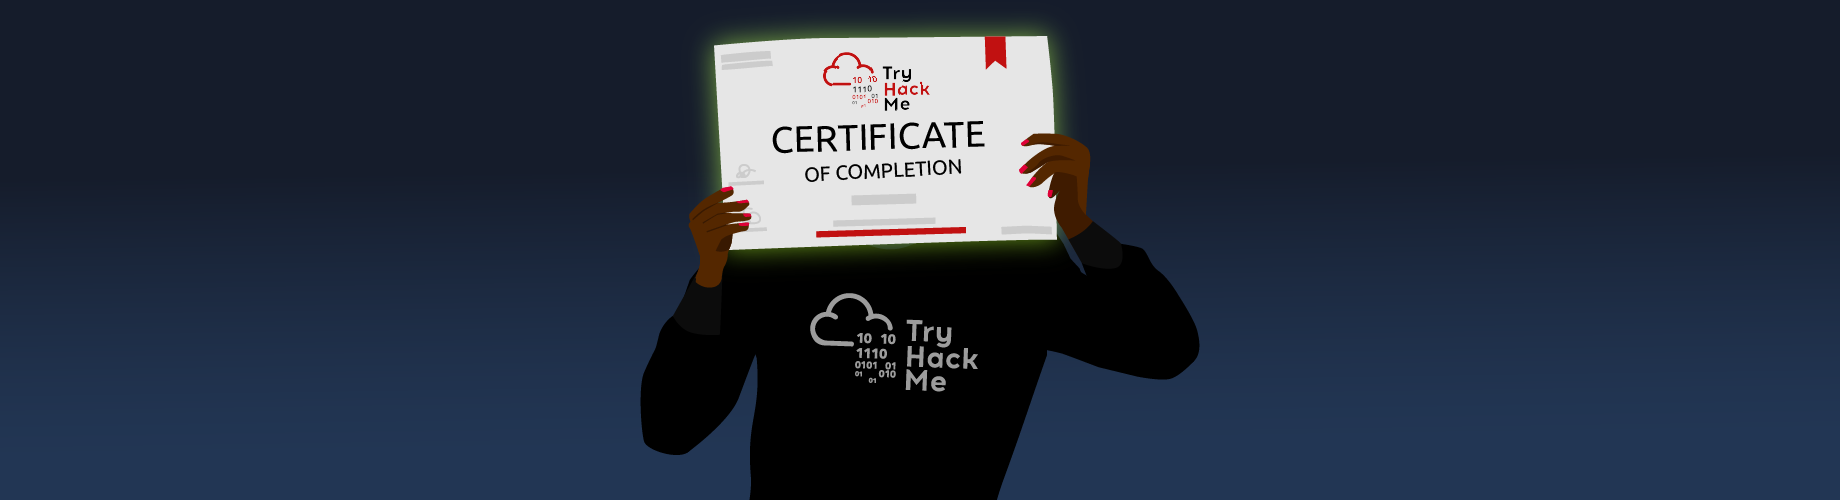 Are Cyber Security Certifications Worth It?